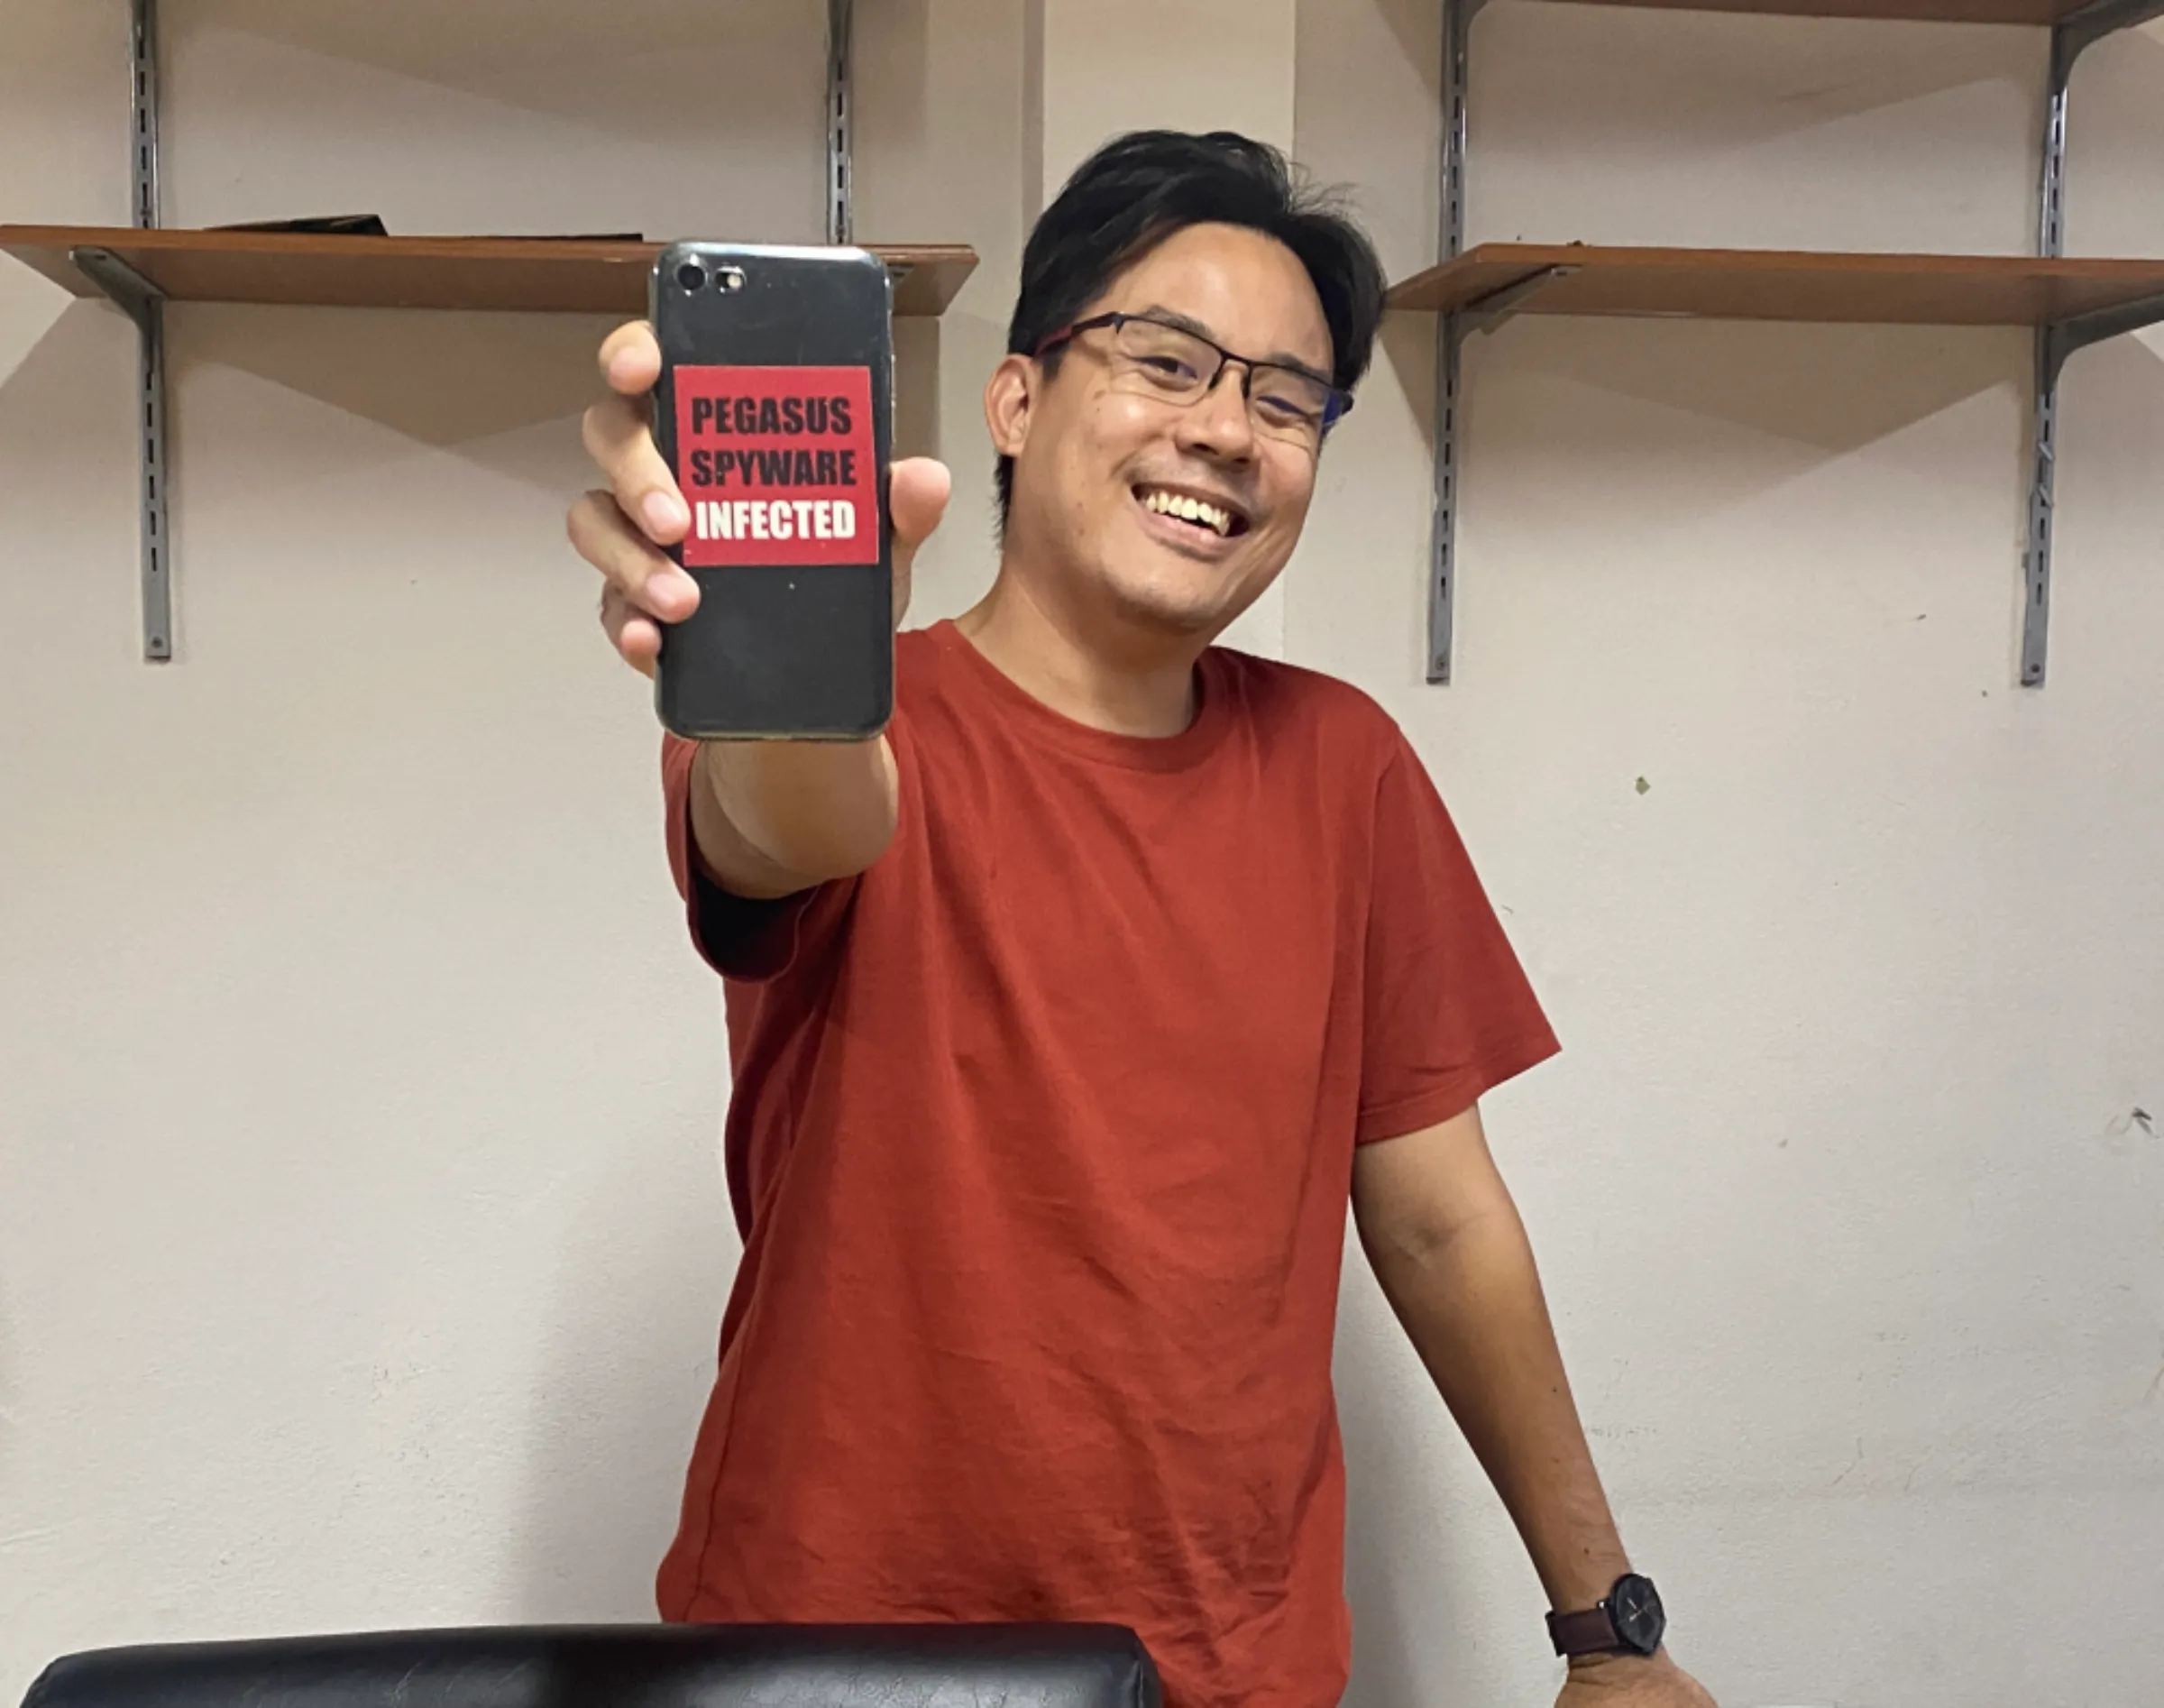 Yingcheep Atchanont, a lawyer at legal non-profit iLaw, holds up his mobile phone with a sticker reading 'Pegasus spyware infected' in his office in Bangkok, Thailand. January 12, 2023